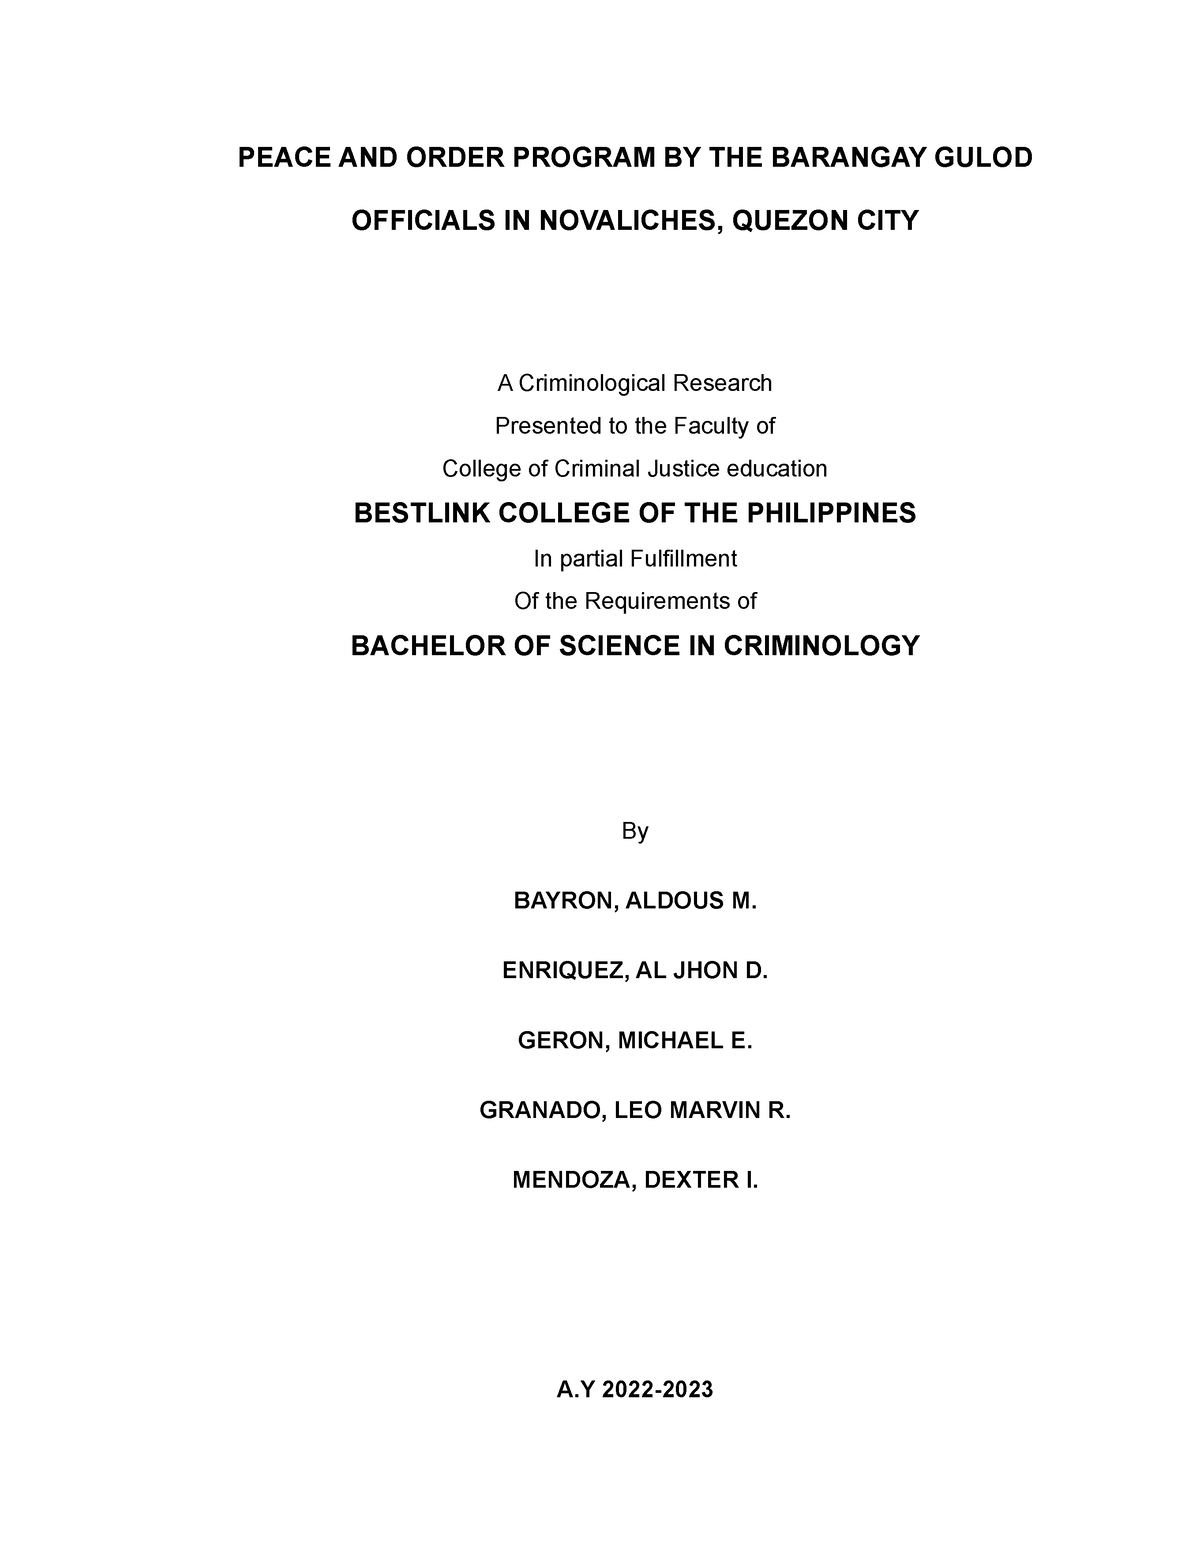 thesis about peace and order in barangay pdf